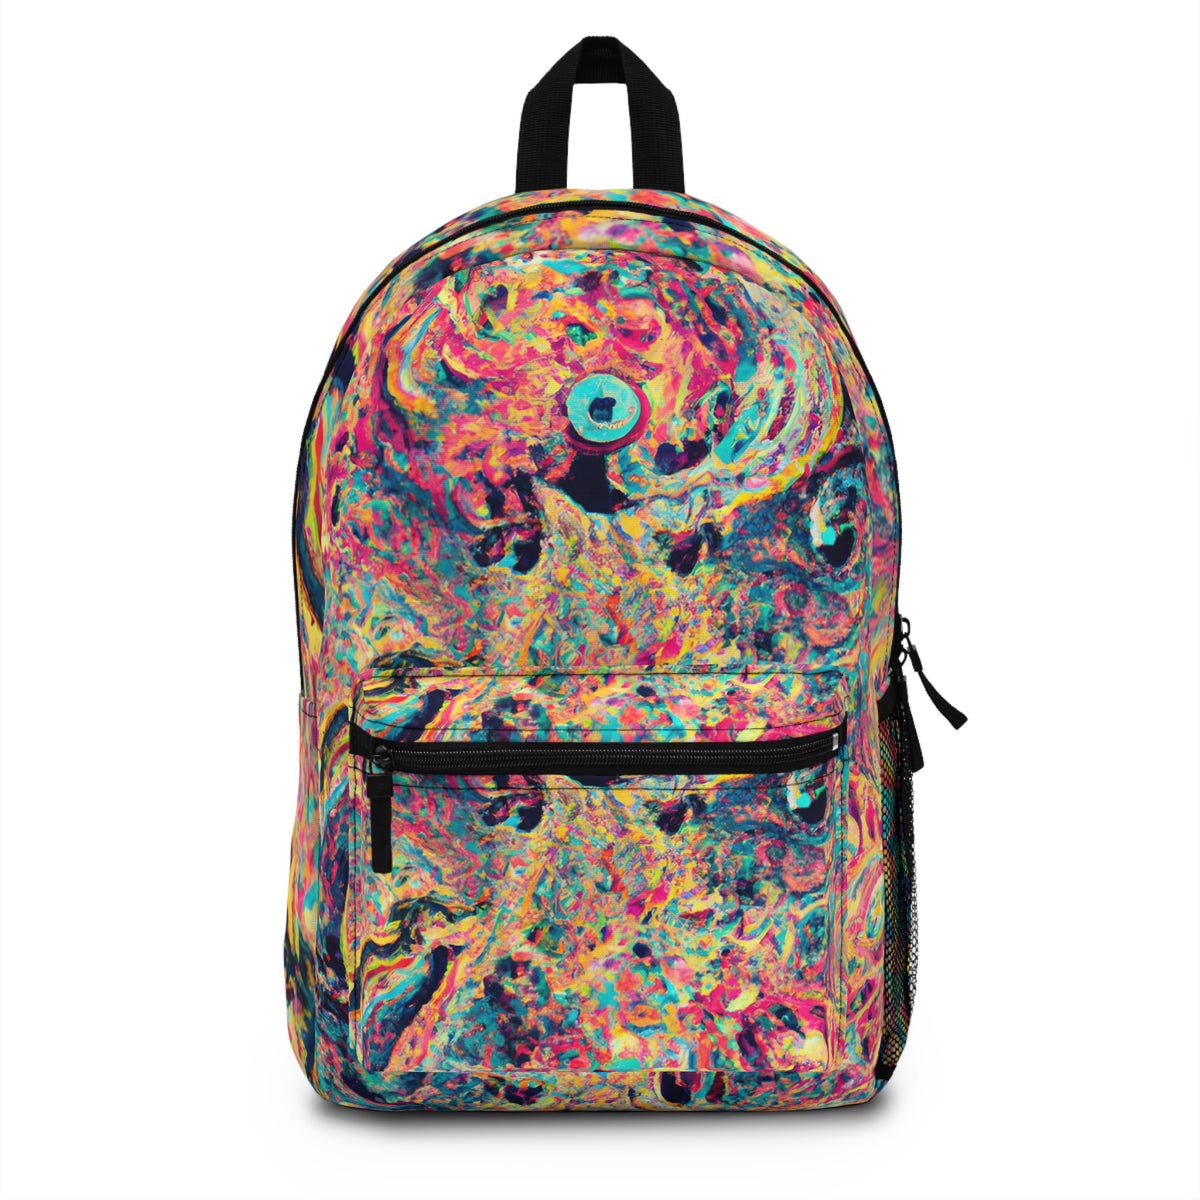 ElectroVamp - Gay-Inspired Backpack